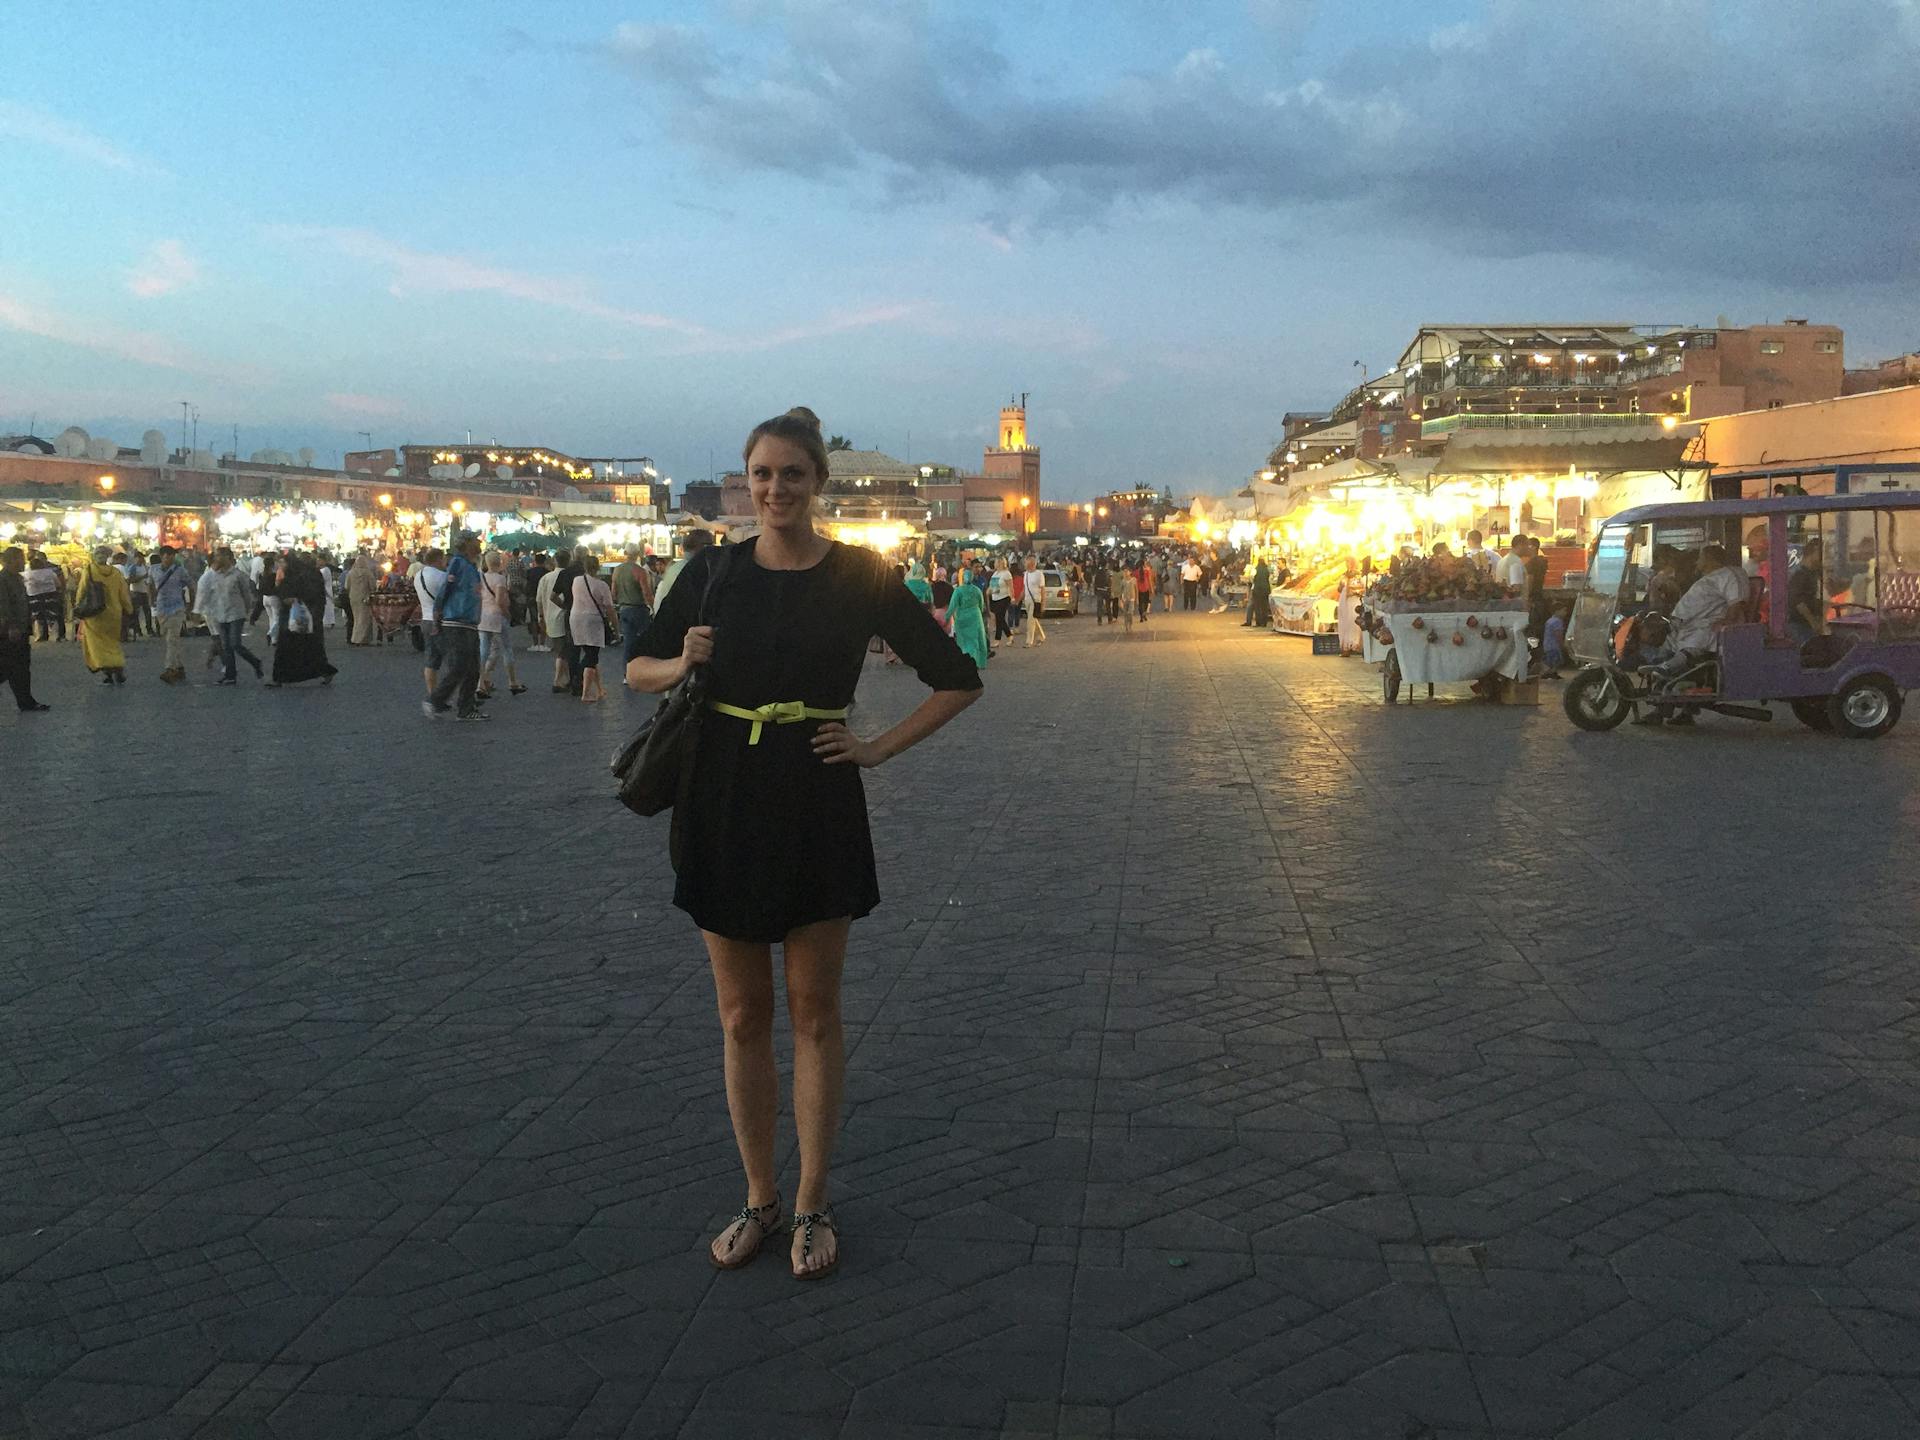 Amanda standing in front of a busy outdoor market in Marrakesh